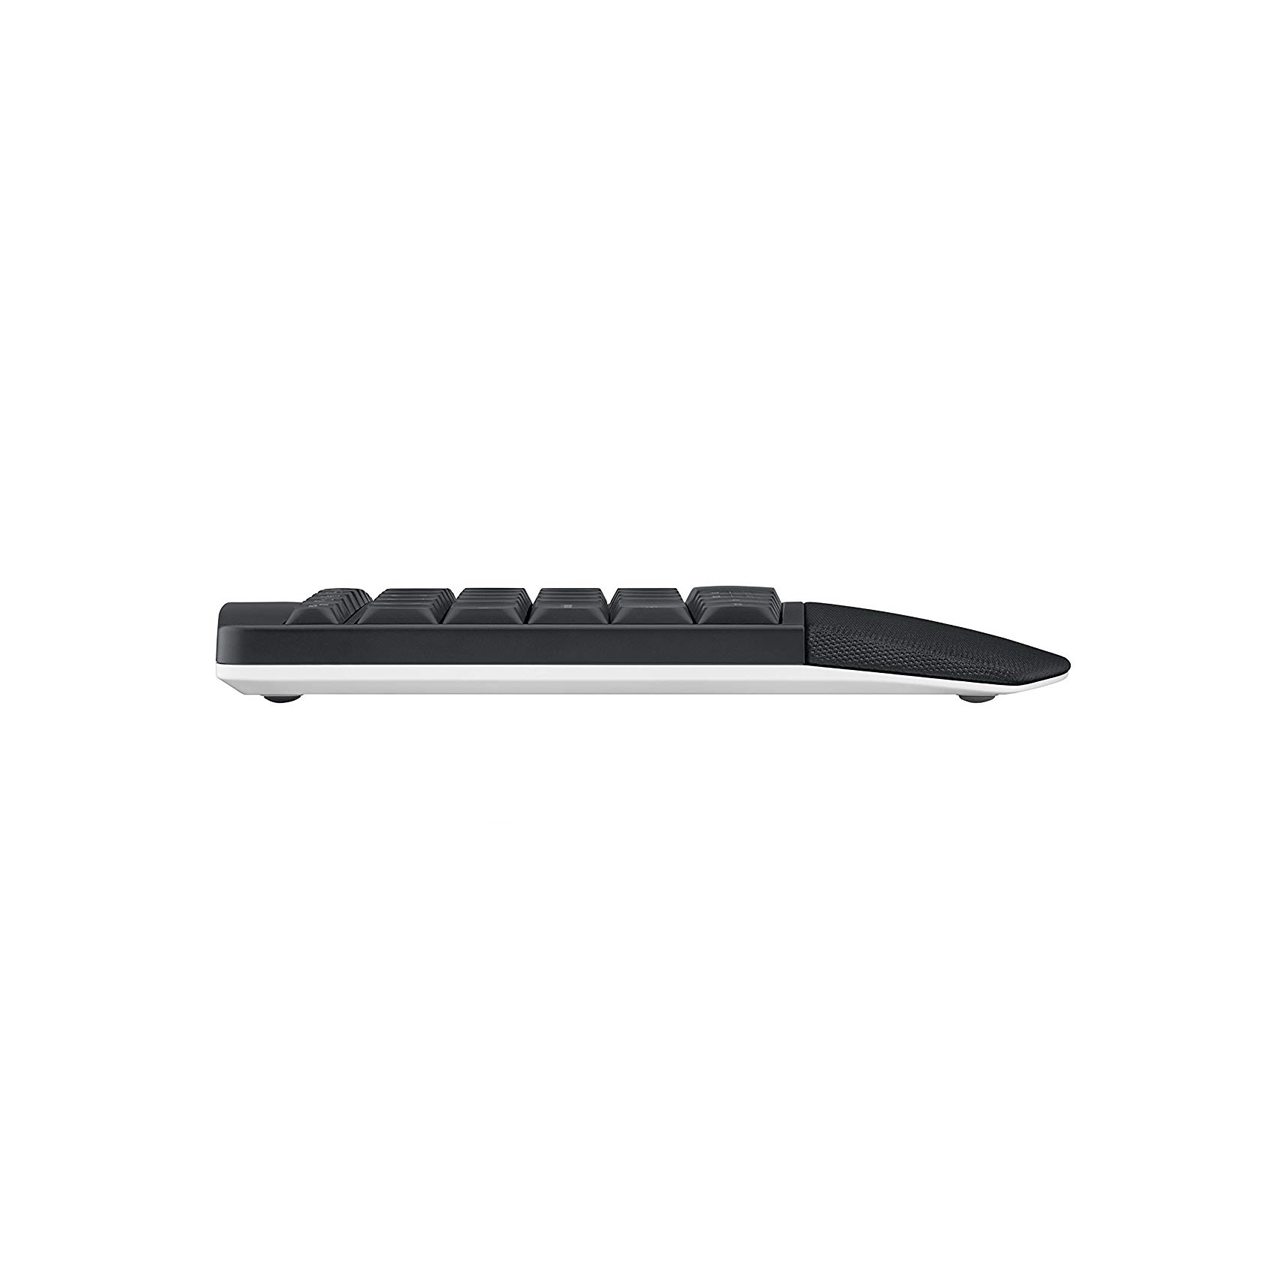 MK850--Wireless---Keyboard-and-Mouse